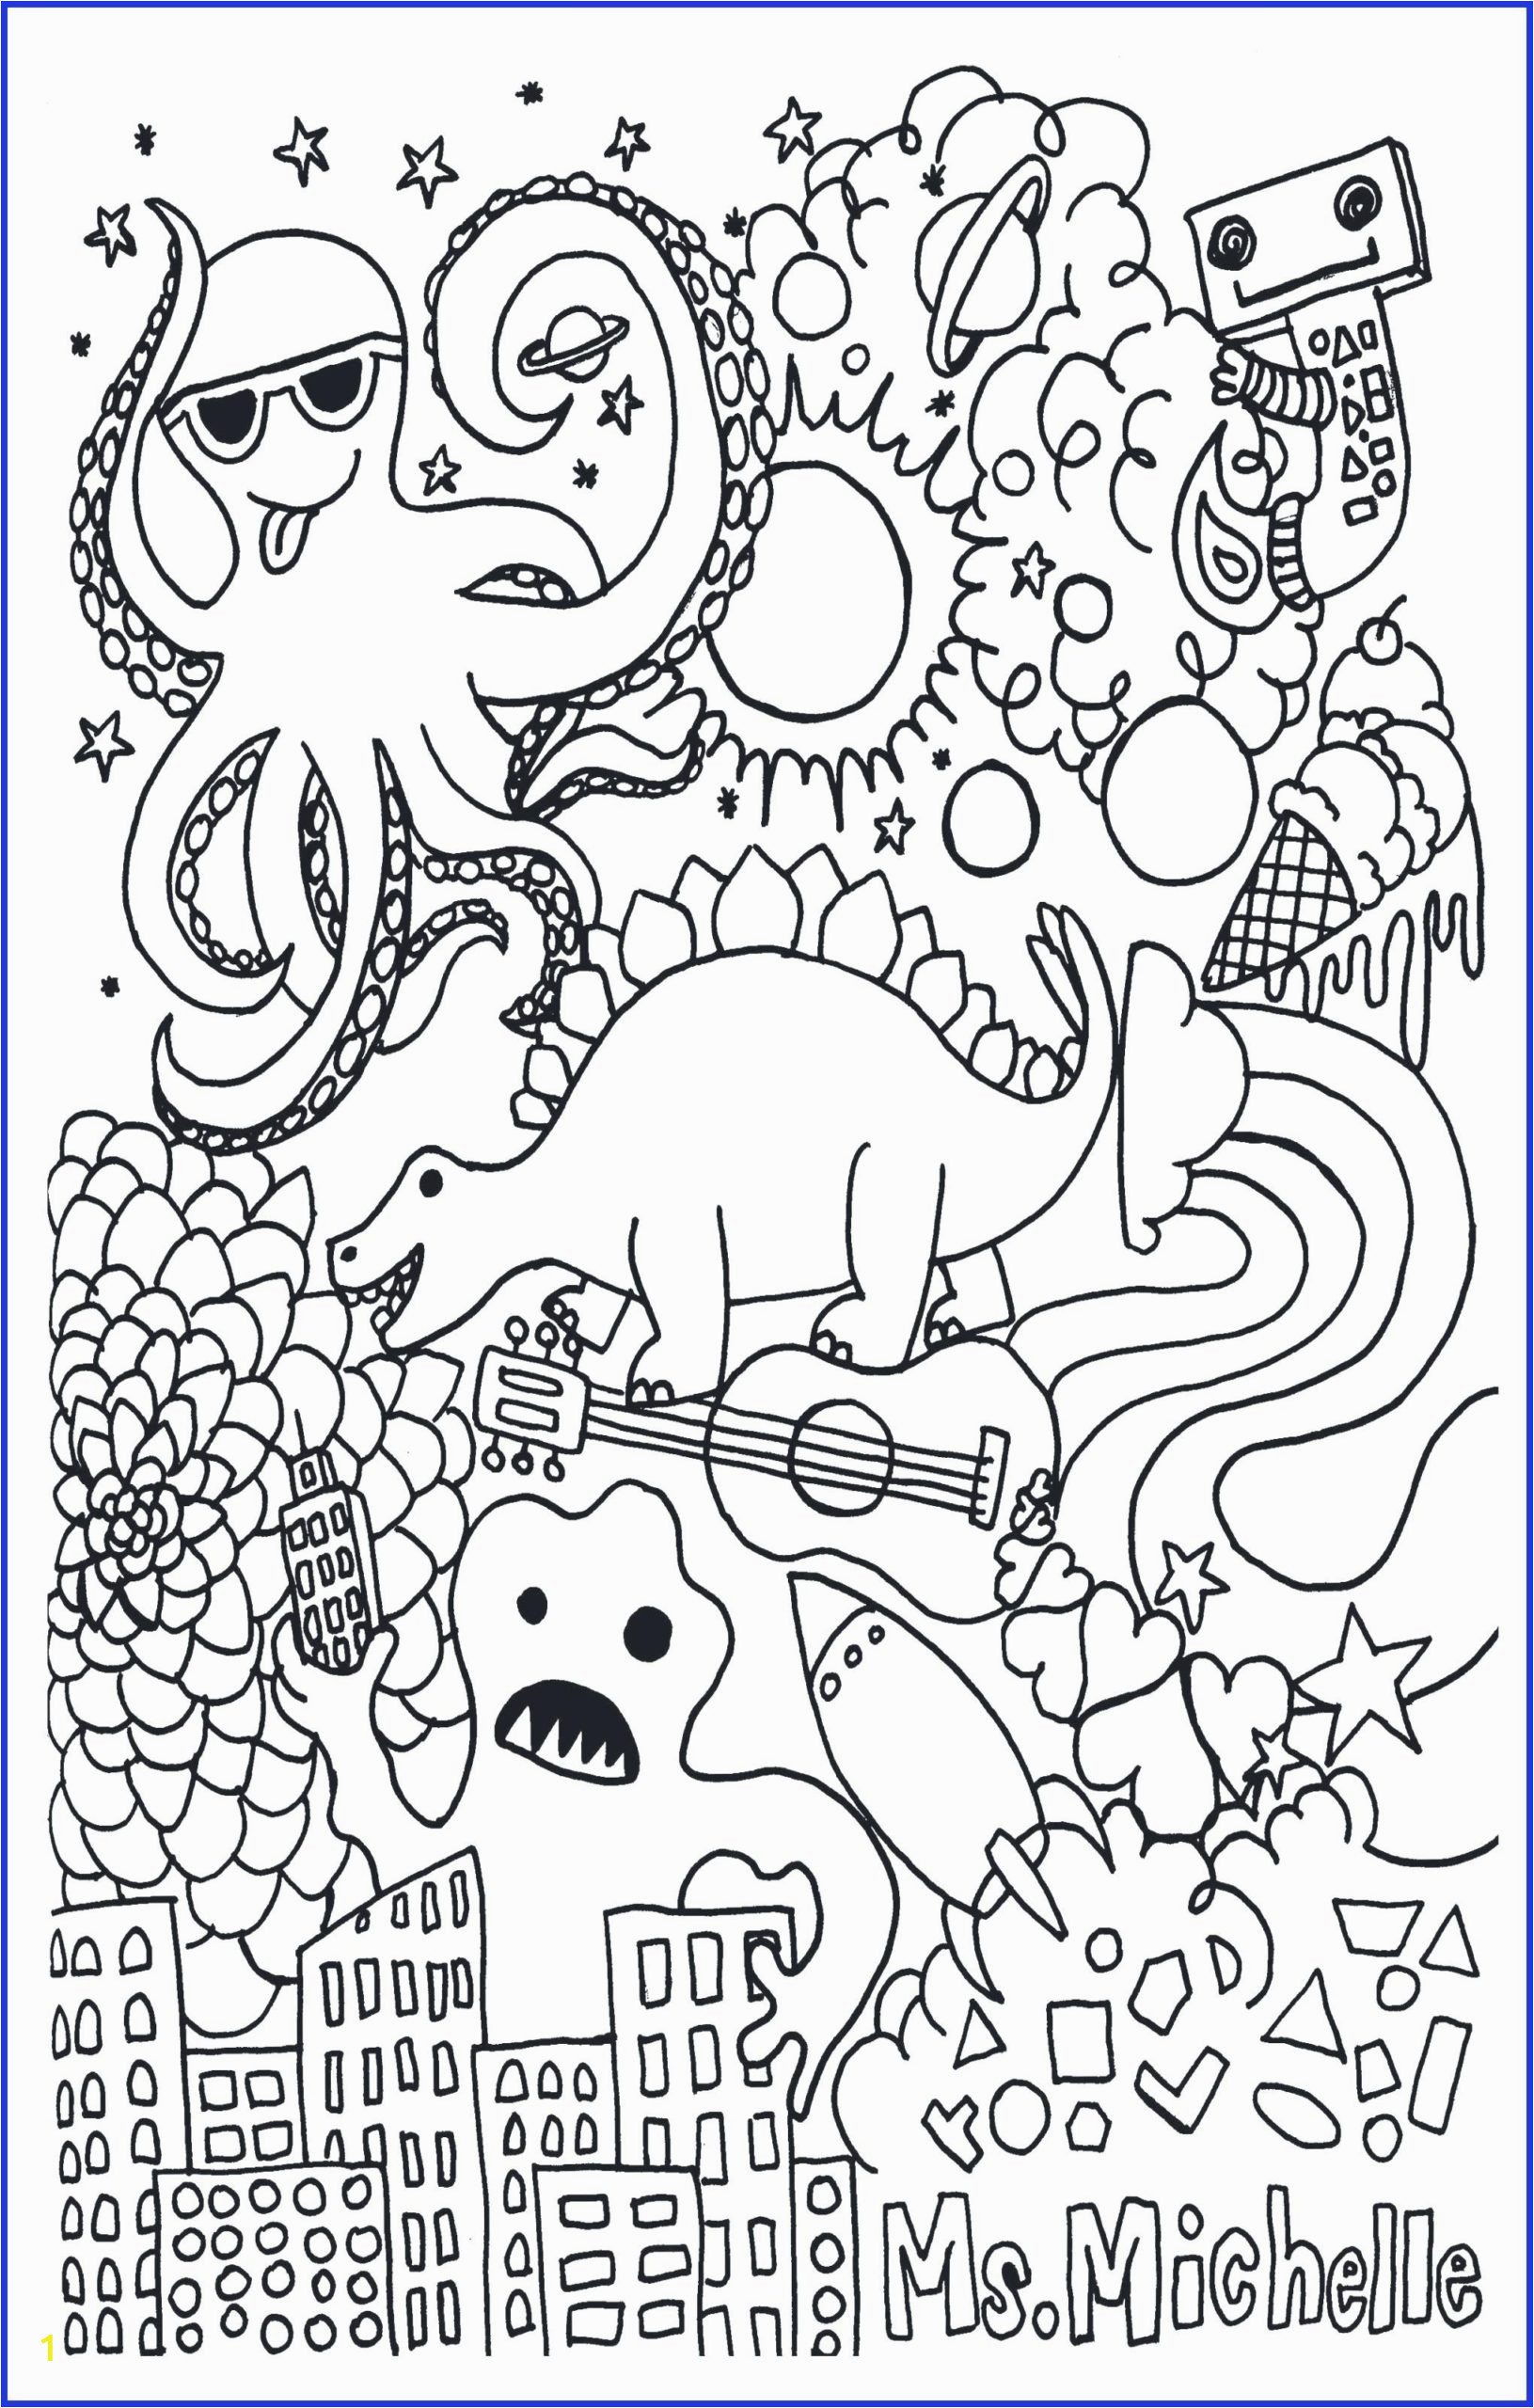 Easy Preschool Coloring Pages 59 Most Wonderful Summer Coloring Pages for Kids Color